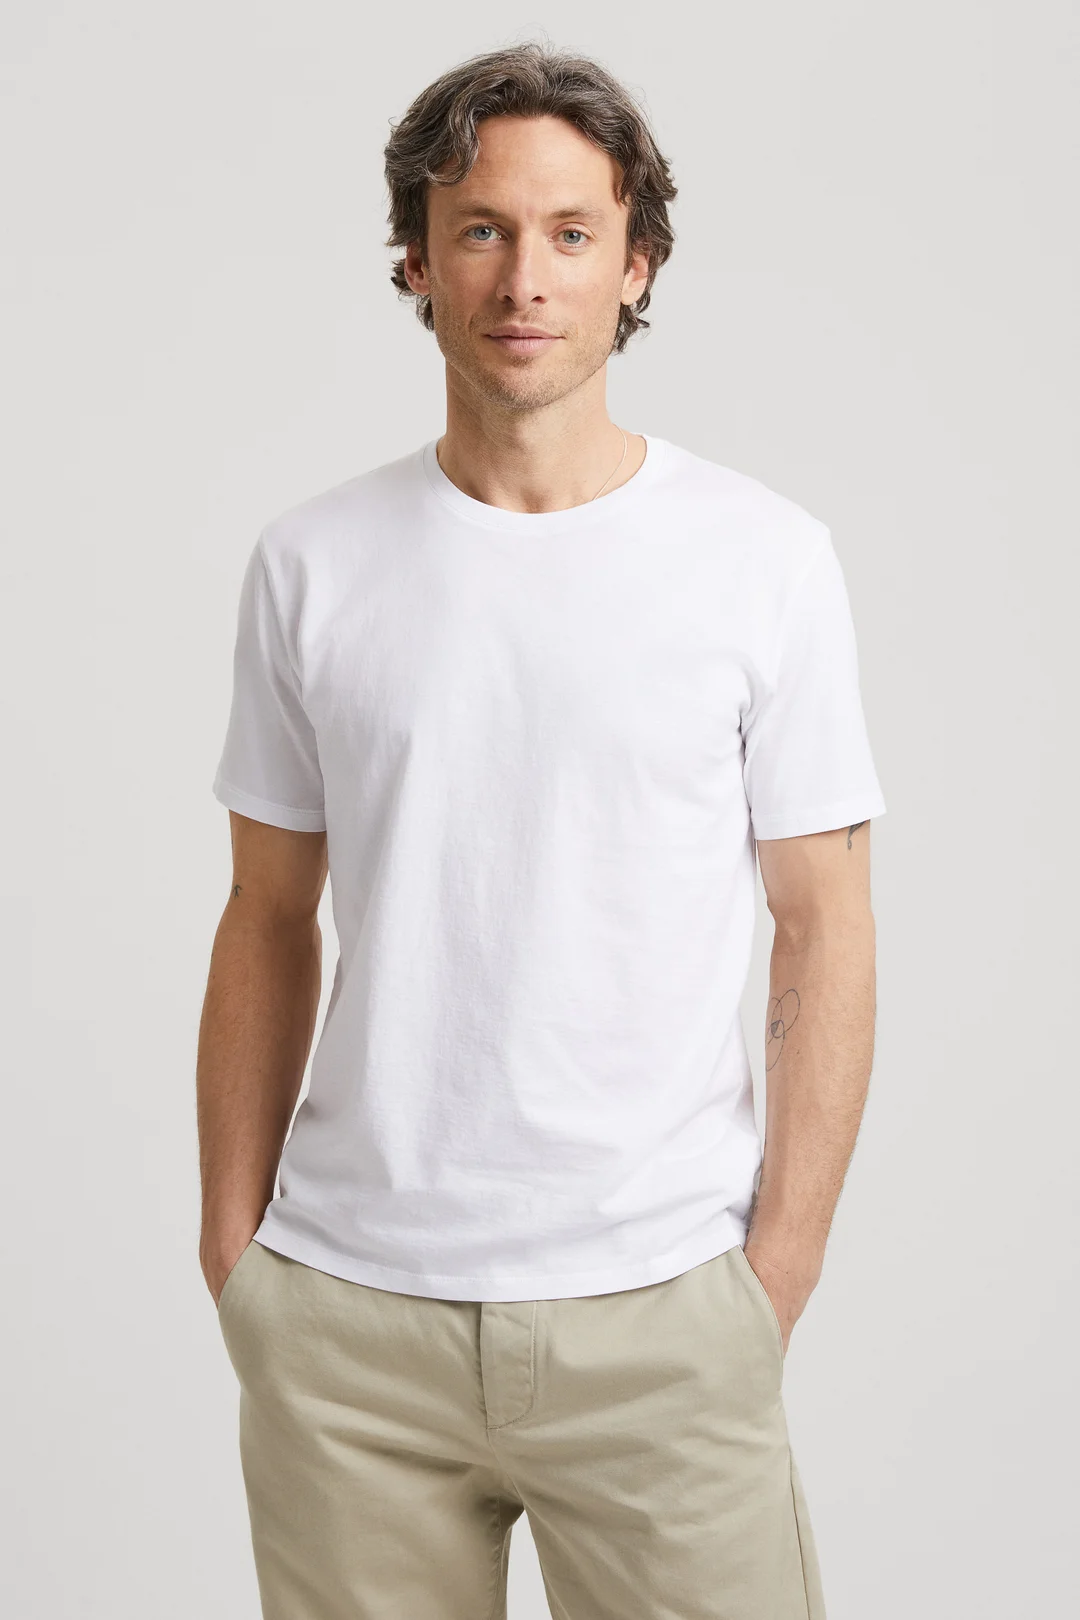 Men's T-Shirts  Egyptian Cotton T-shirts, Piques & Long Sleeves - ASKET